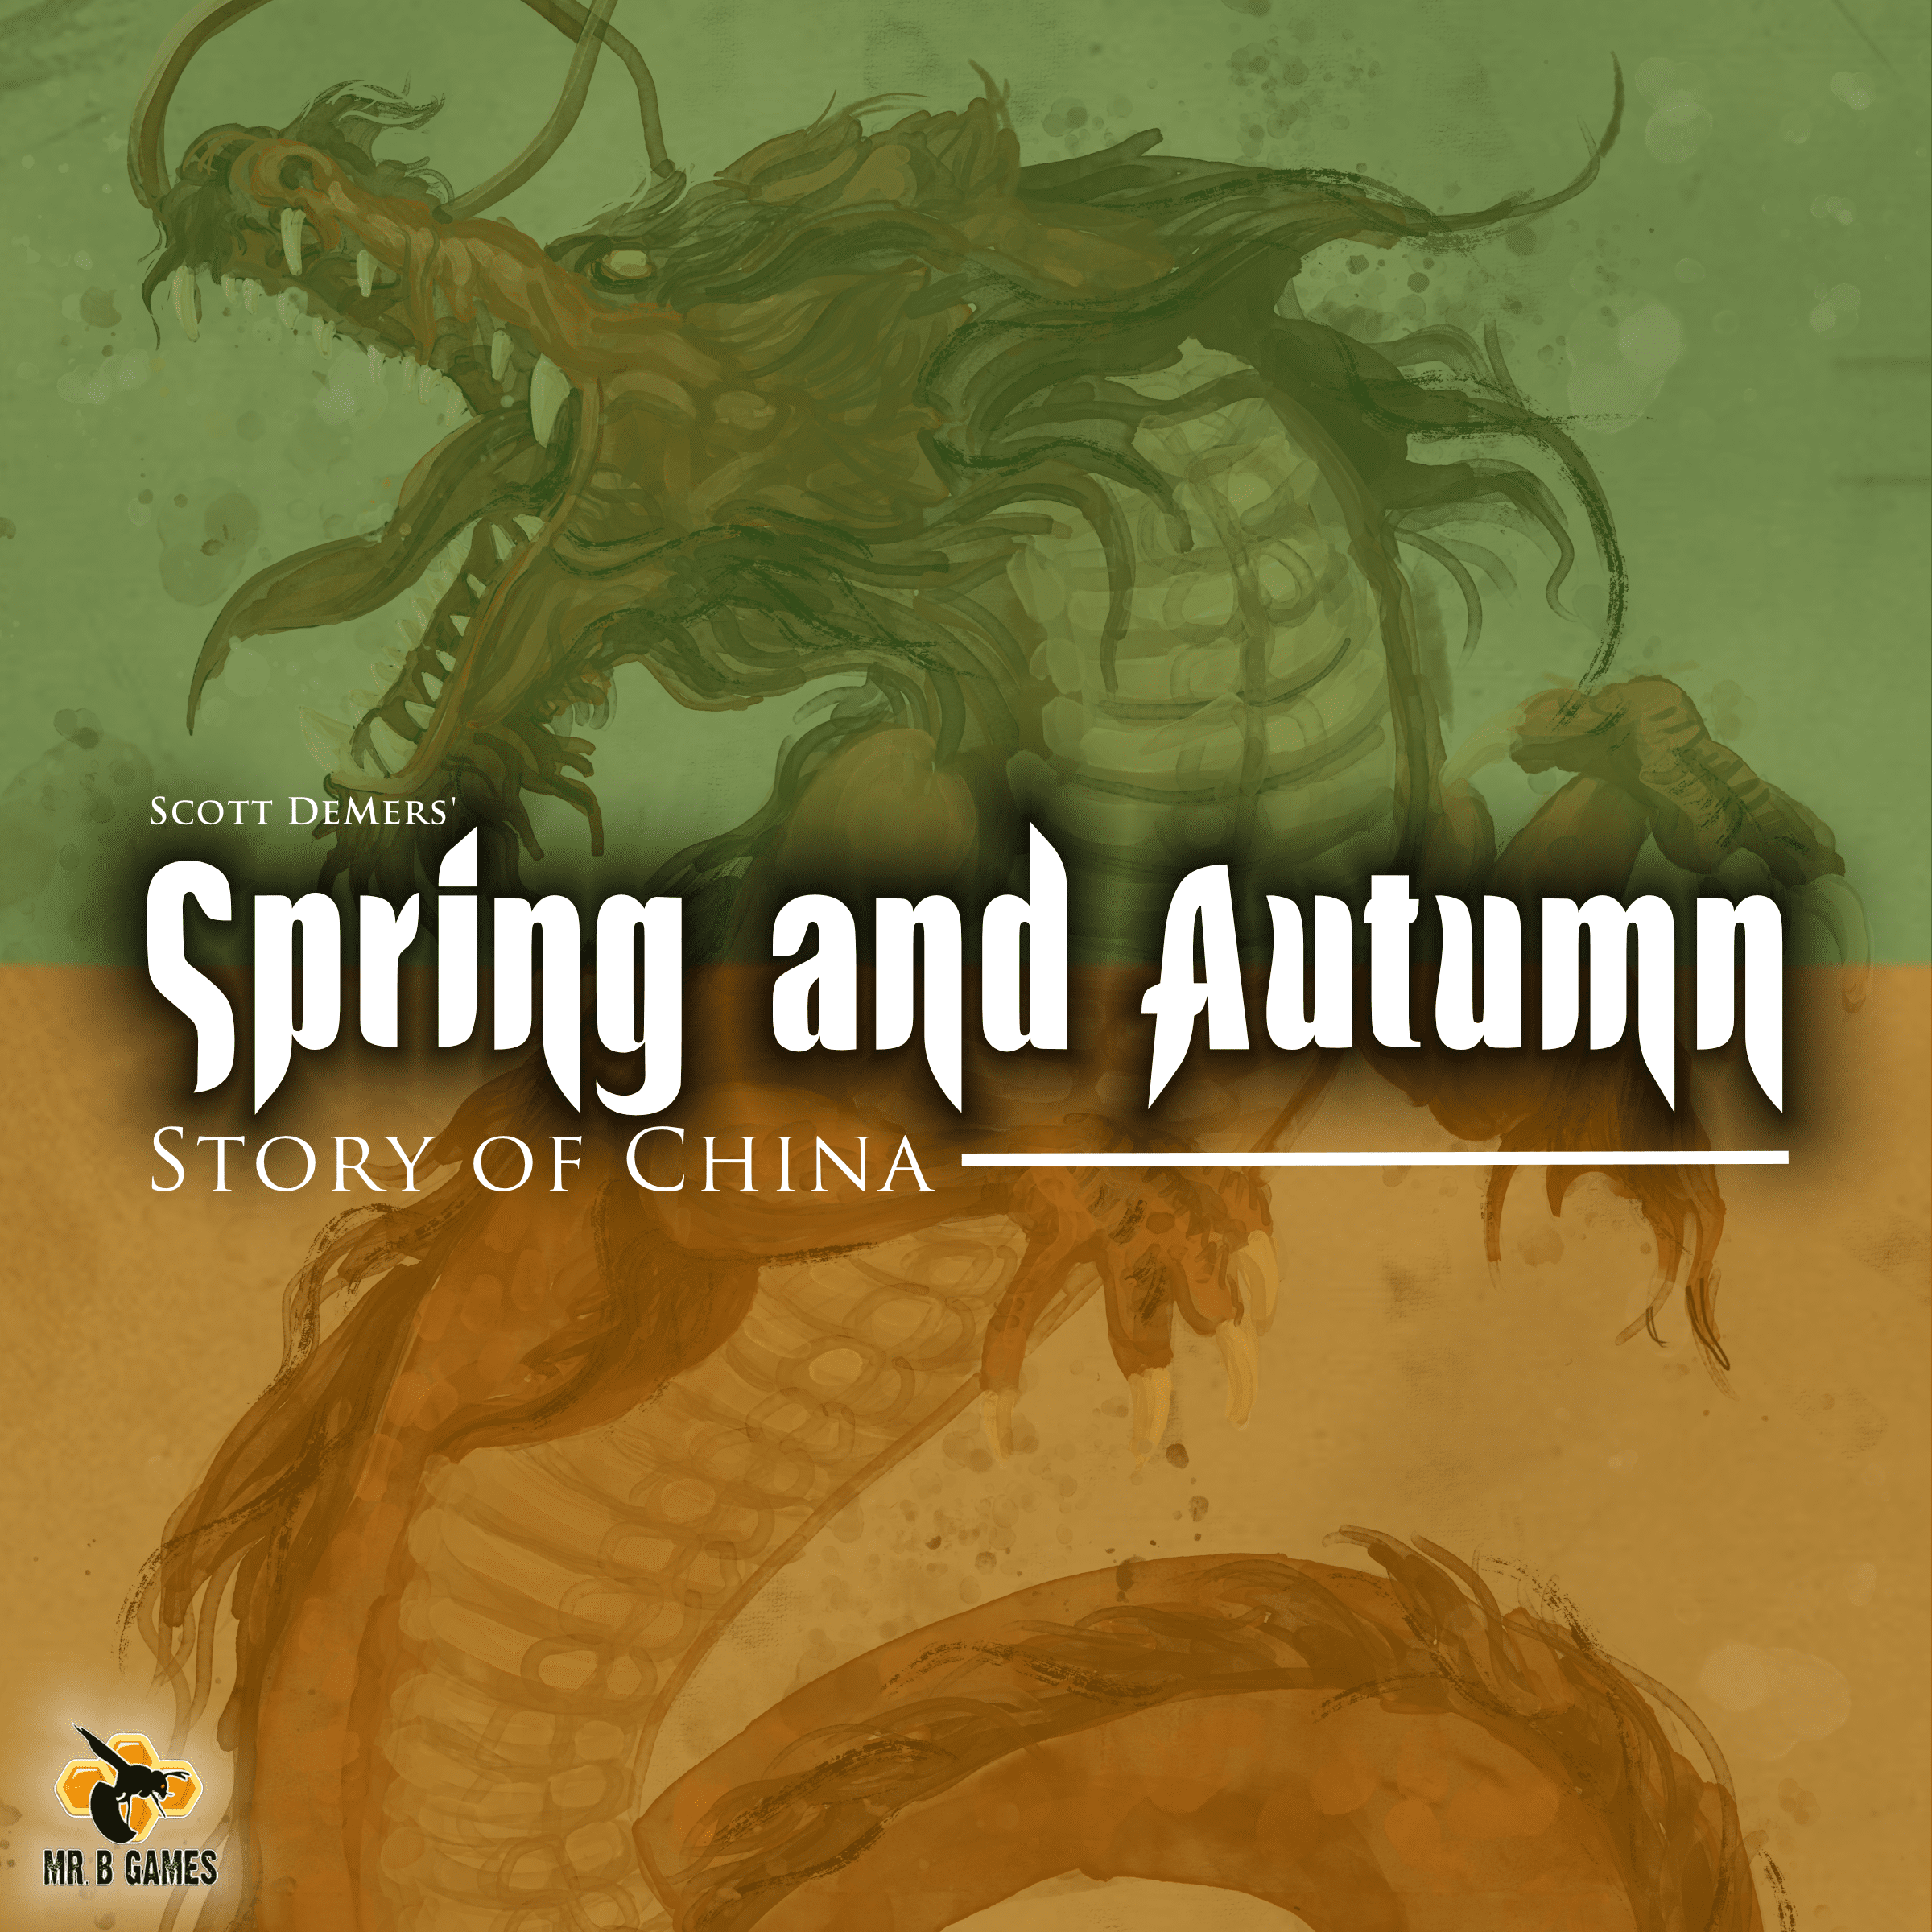 Spring and Autumn: Story of China